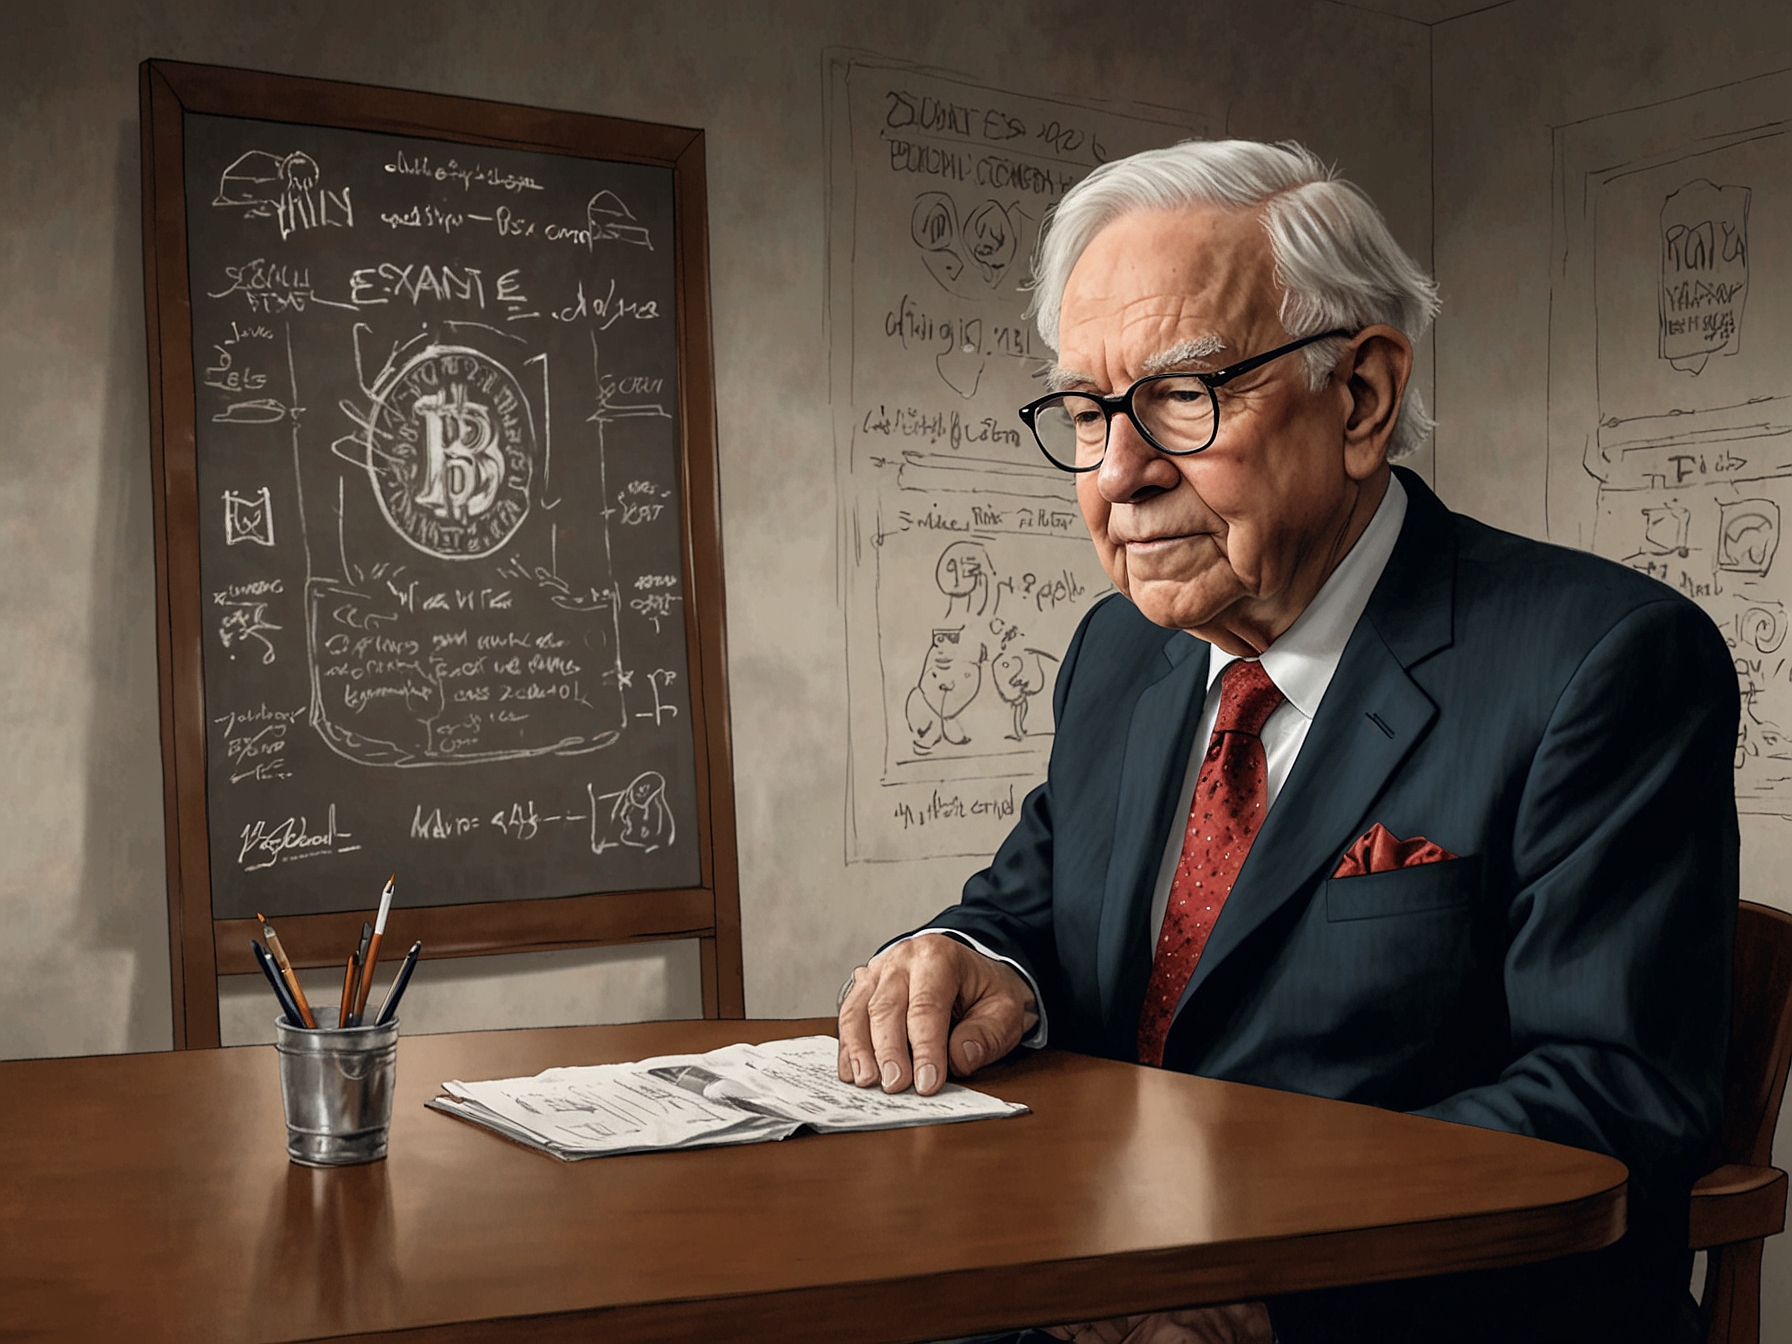 An illustration of Warren Buffett thoughtfully considering Chipotle's stock symbol, symbolizing his evaluation of the company's investment potential.